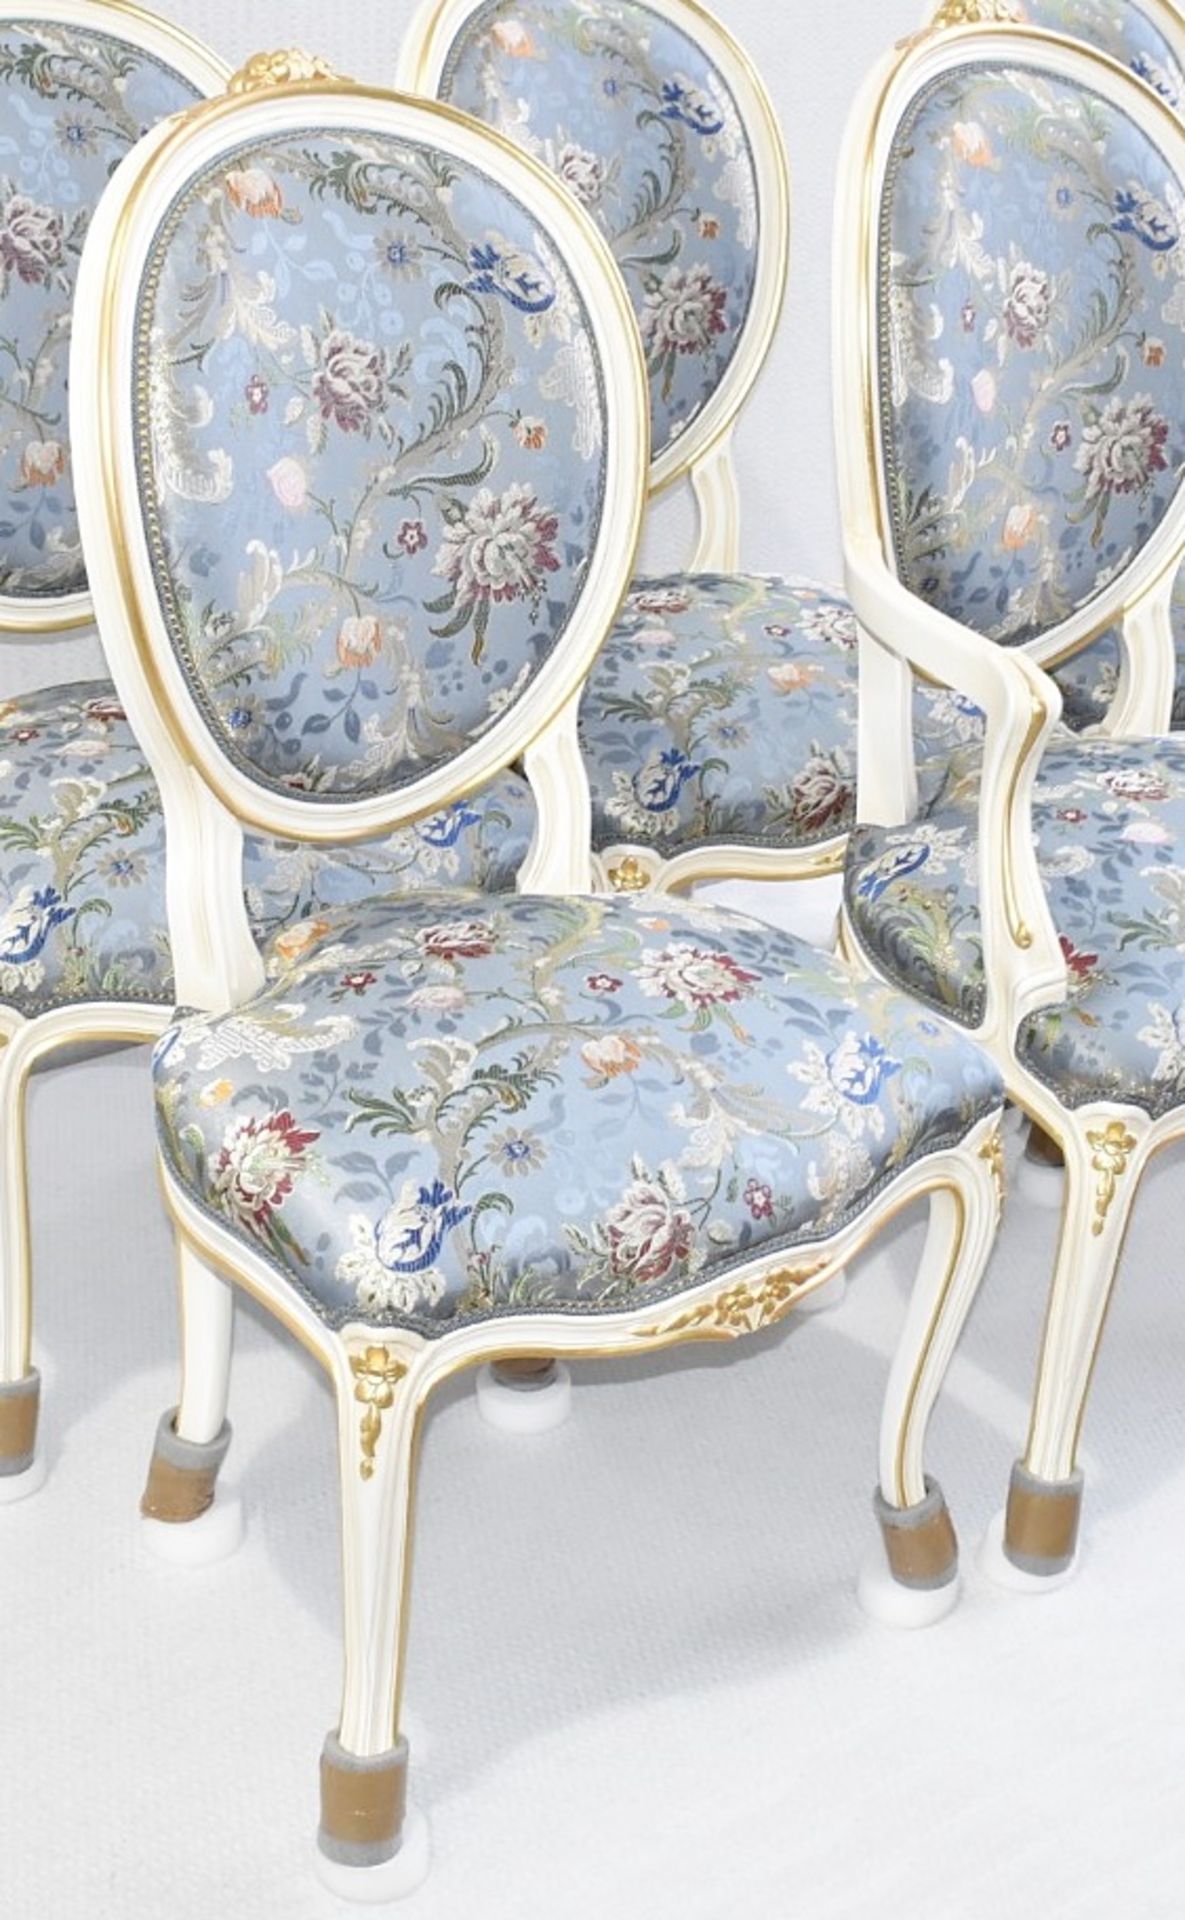 Set of 6 x ANGELO CAPPELLINI 'Timeless' Baroque-style Carved Dining Chairs, Floral Upholstered - Image 11 of 14